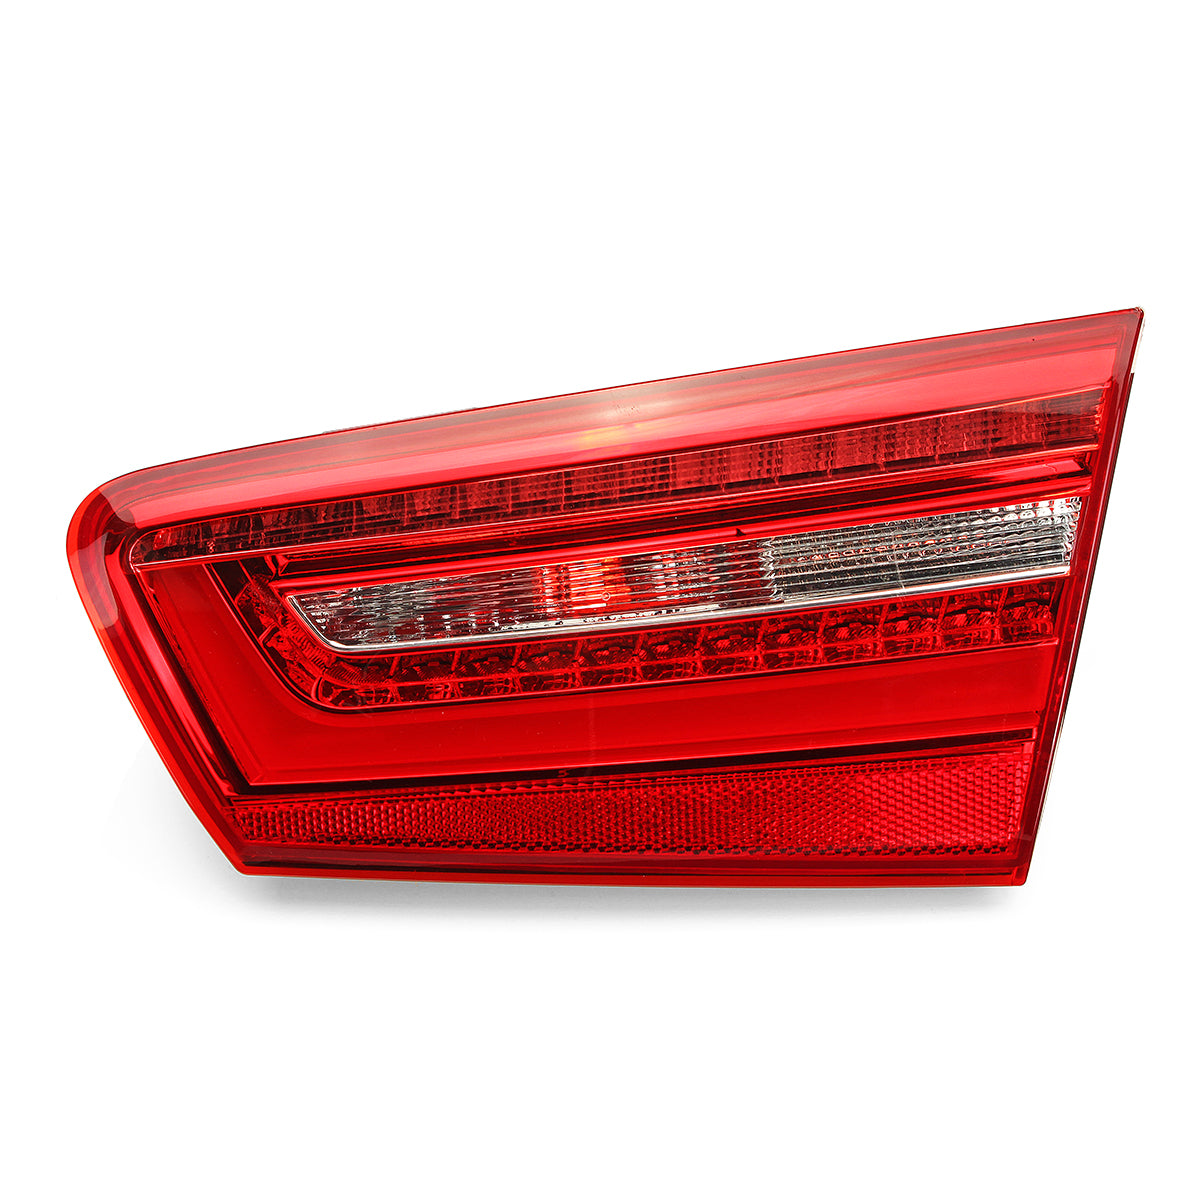 Firebrick Car LED Rear Inner Tail Light Brake Lamp with Bulb Wiring Harness for Audi A6 C7 2010-2016 Saloon 4GD945093 4GD945094